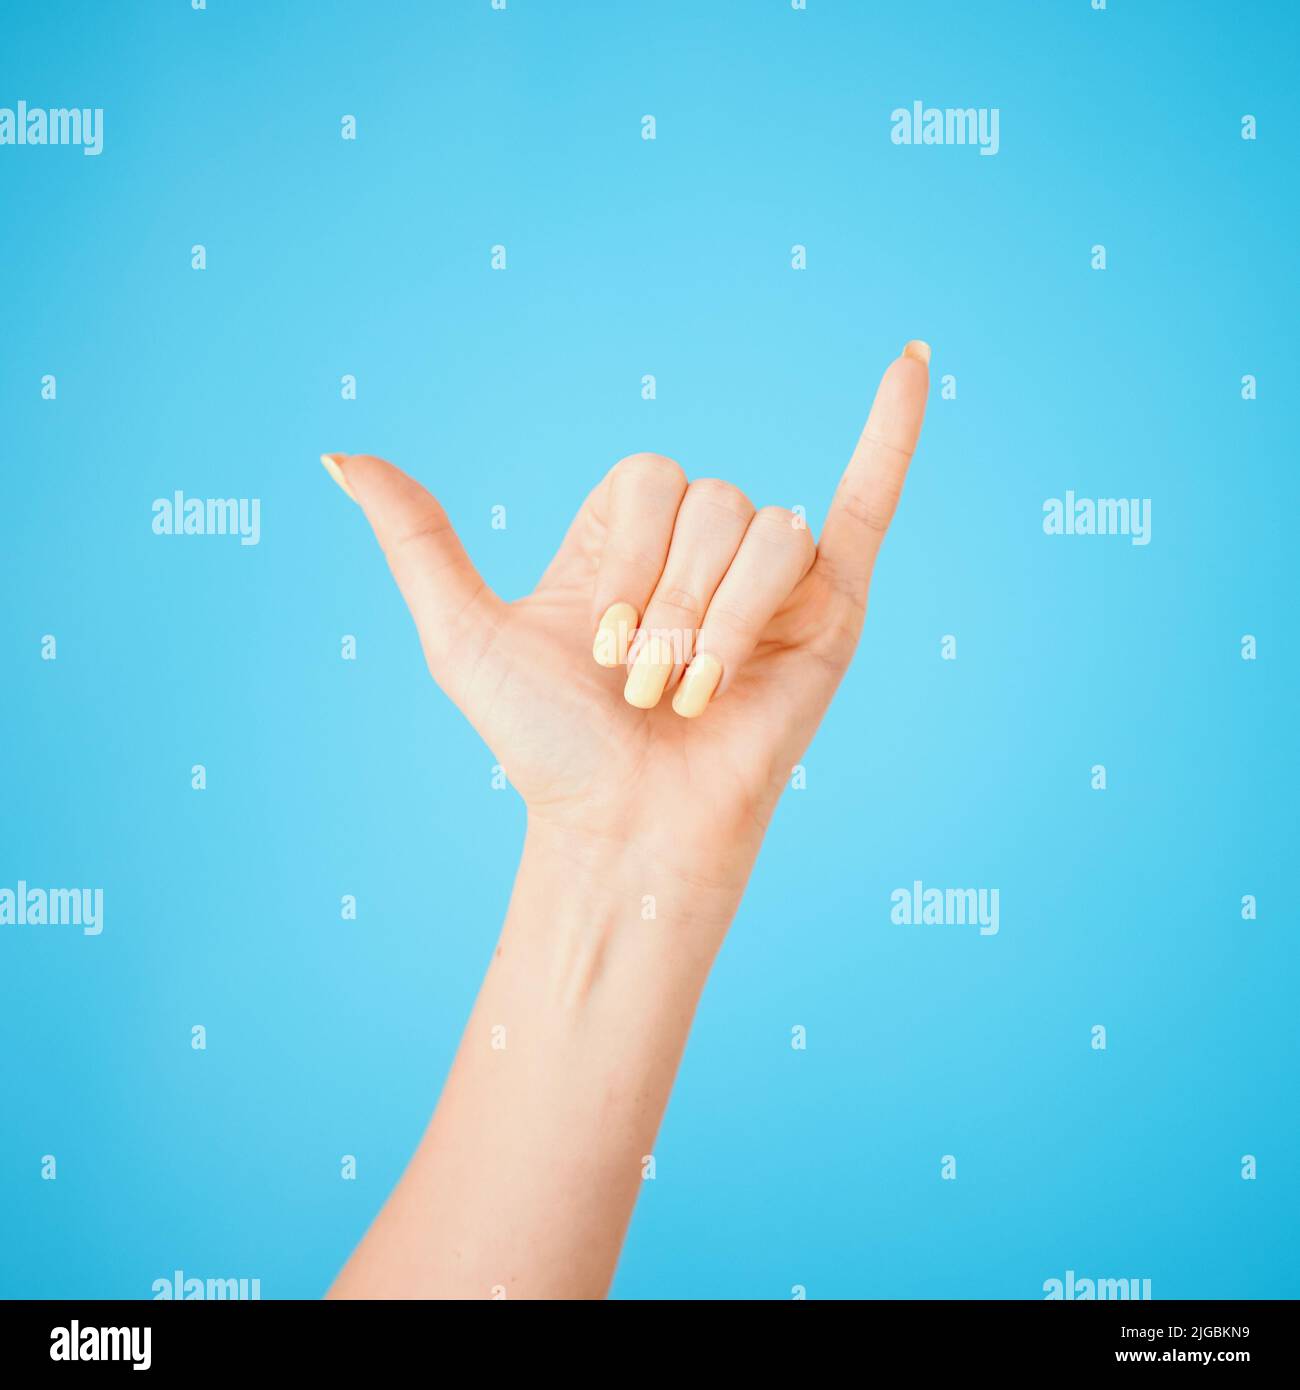 Hey, whats up. Studio shot of an unrecognisable woman showing a shaka hand sign against a blue background. Stock Photo